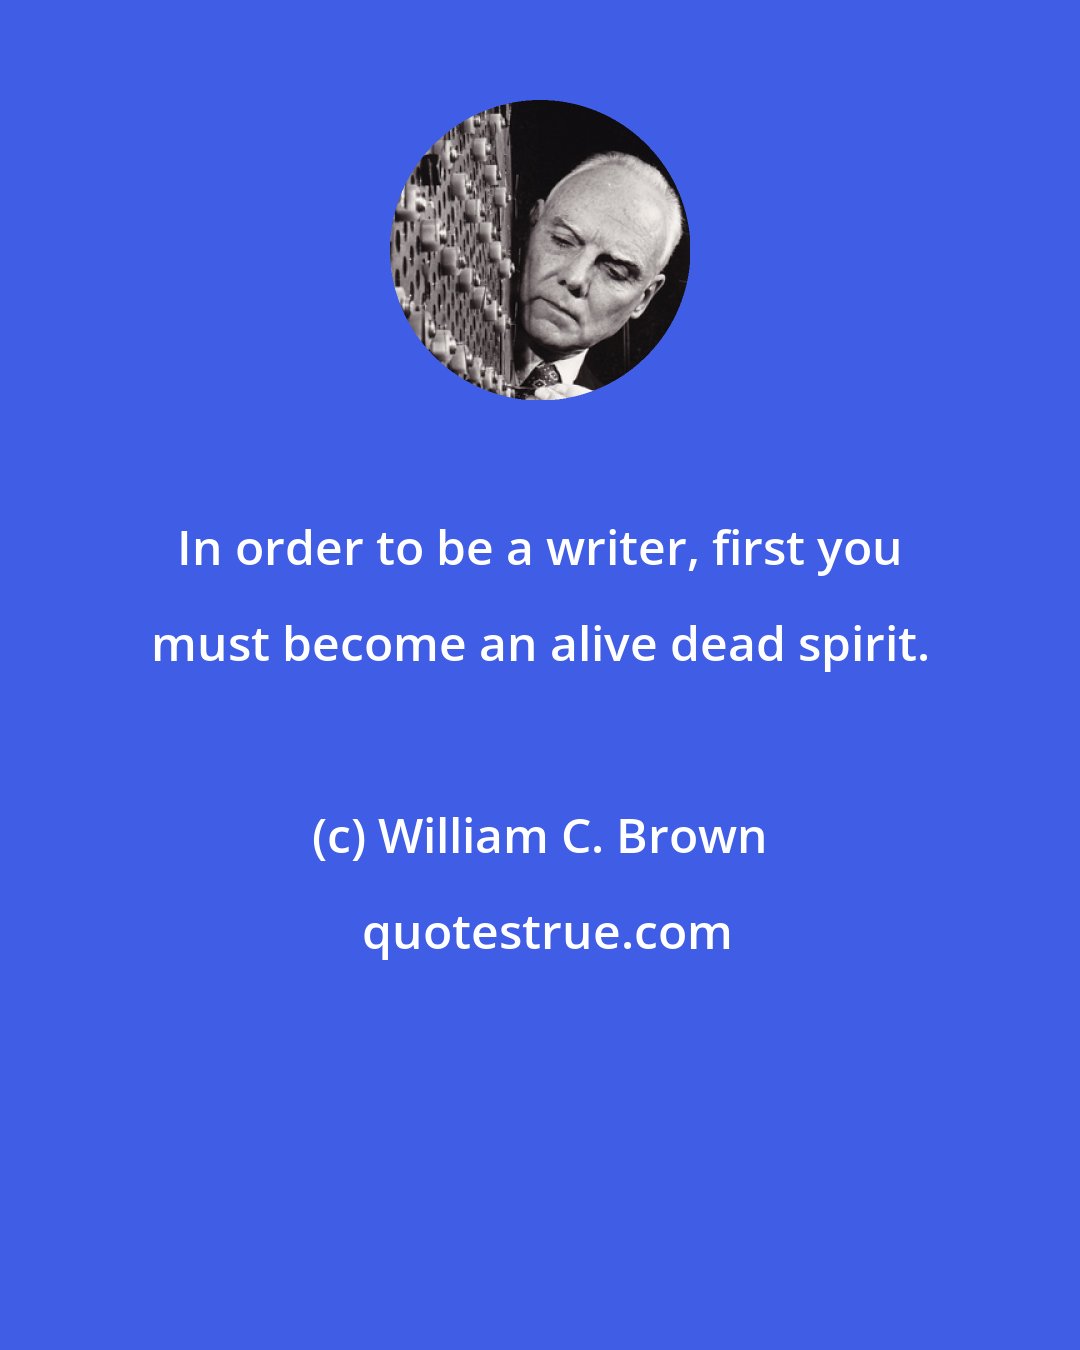 William C. Brown: In order to be a writer, first you must become an alive dead spirit.